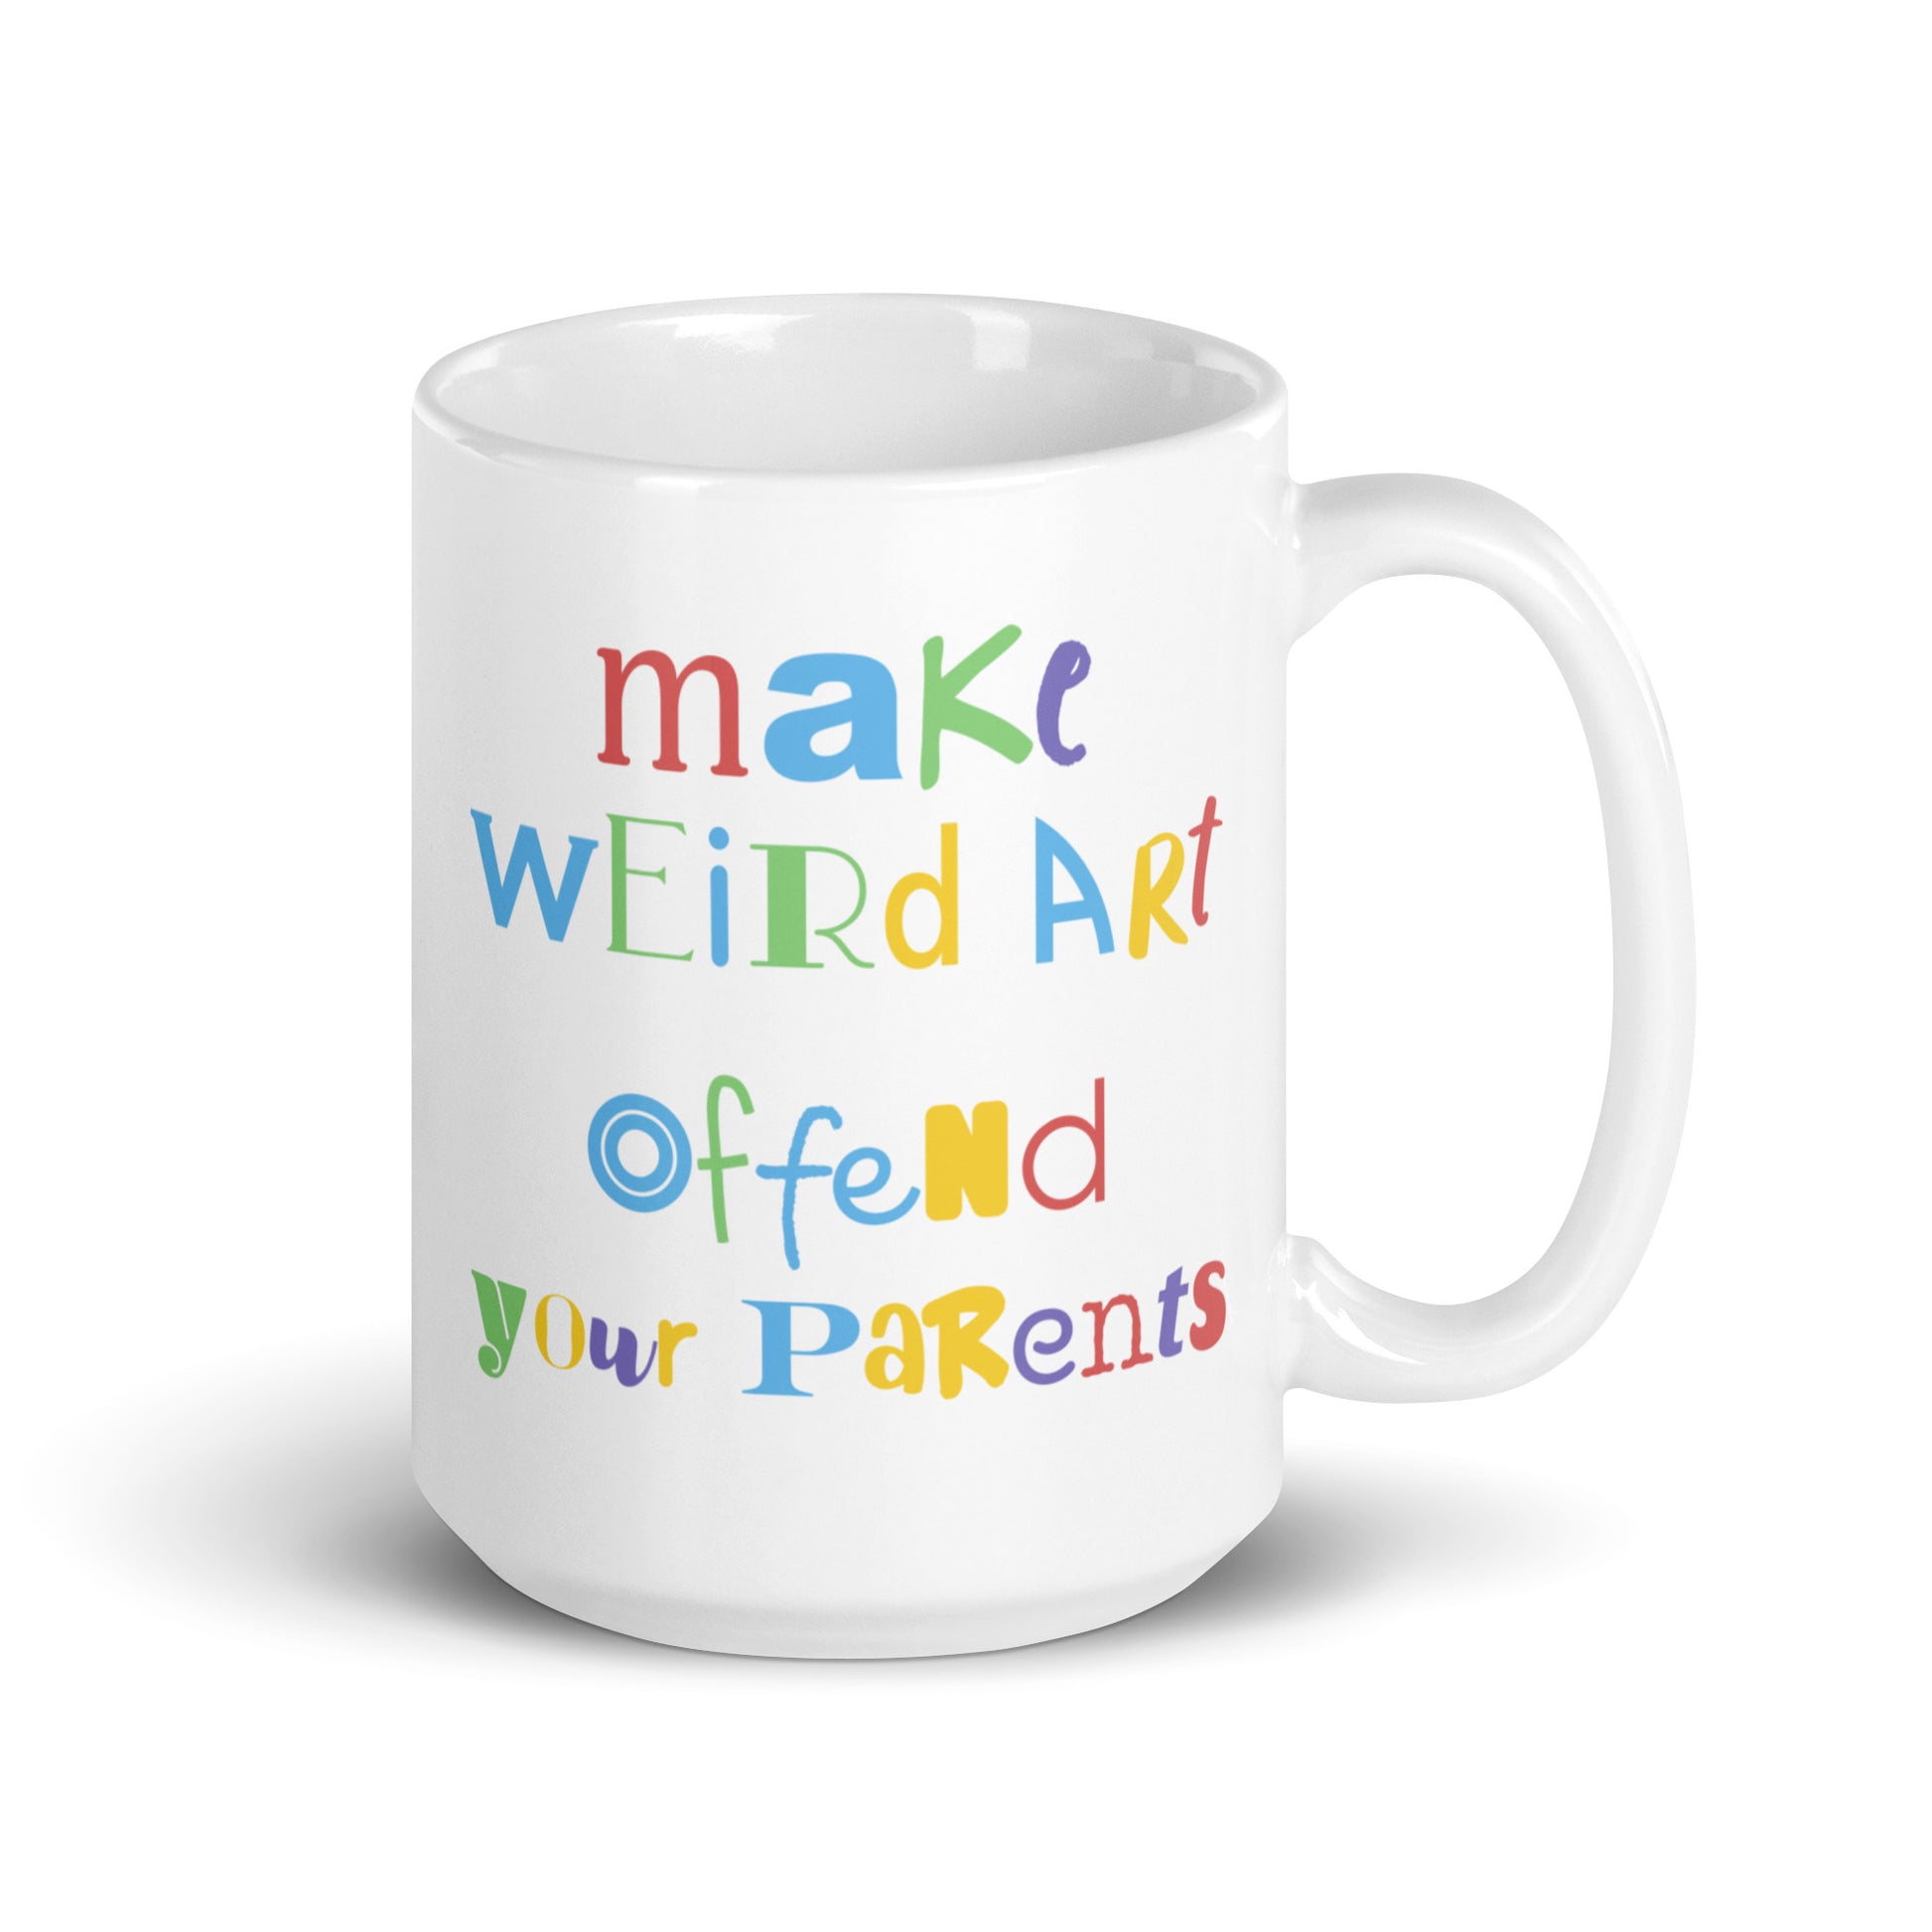 A 15 ounce white ceramic mug featuring text that reads "make weird art, offend your parents" in varying fonts and colors